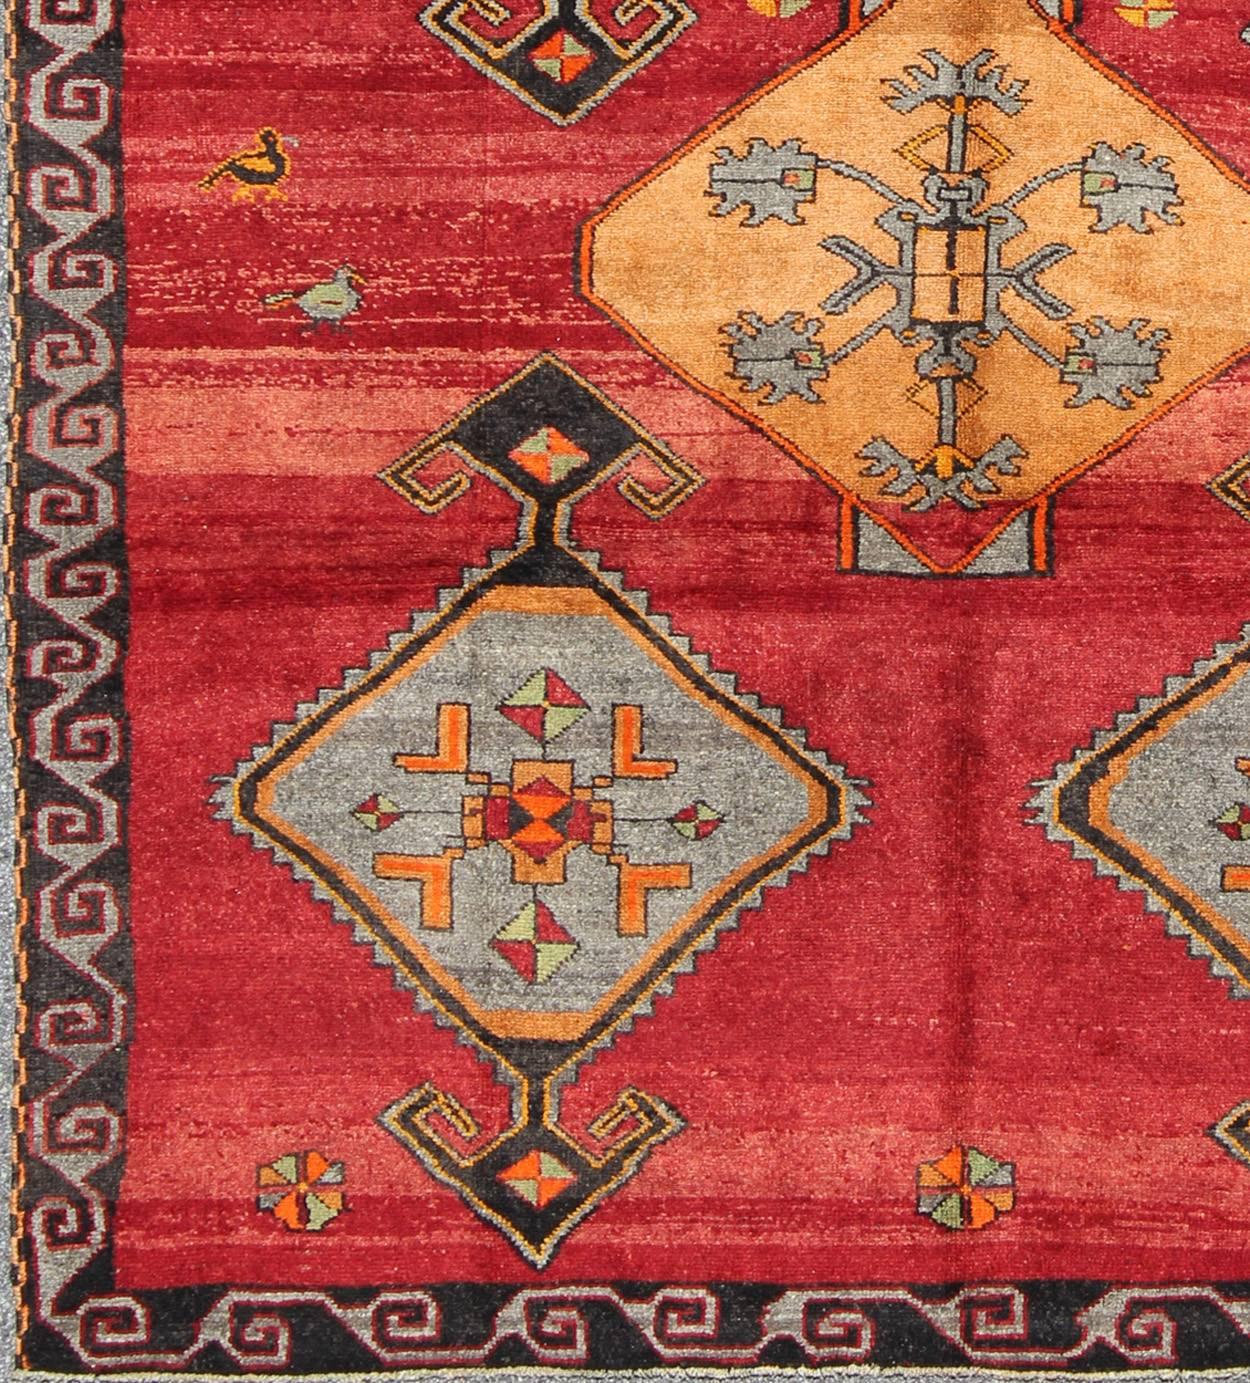 This Kars wool rug, handwoven in Turkey, features exquisite traditional medallions in a bright palette with pops of orange, charcoal and gray. An ornate charcoal border, detailed with a repeating pattern, frames a striated red field. 

Measures: